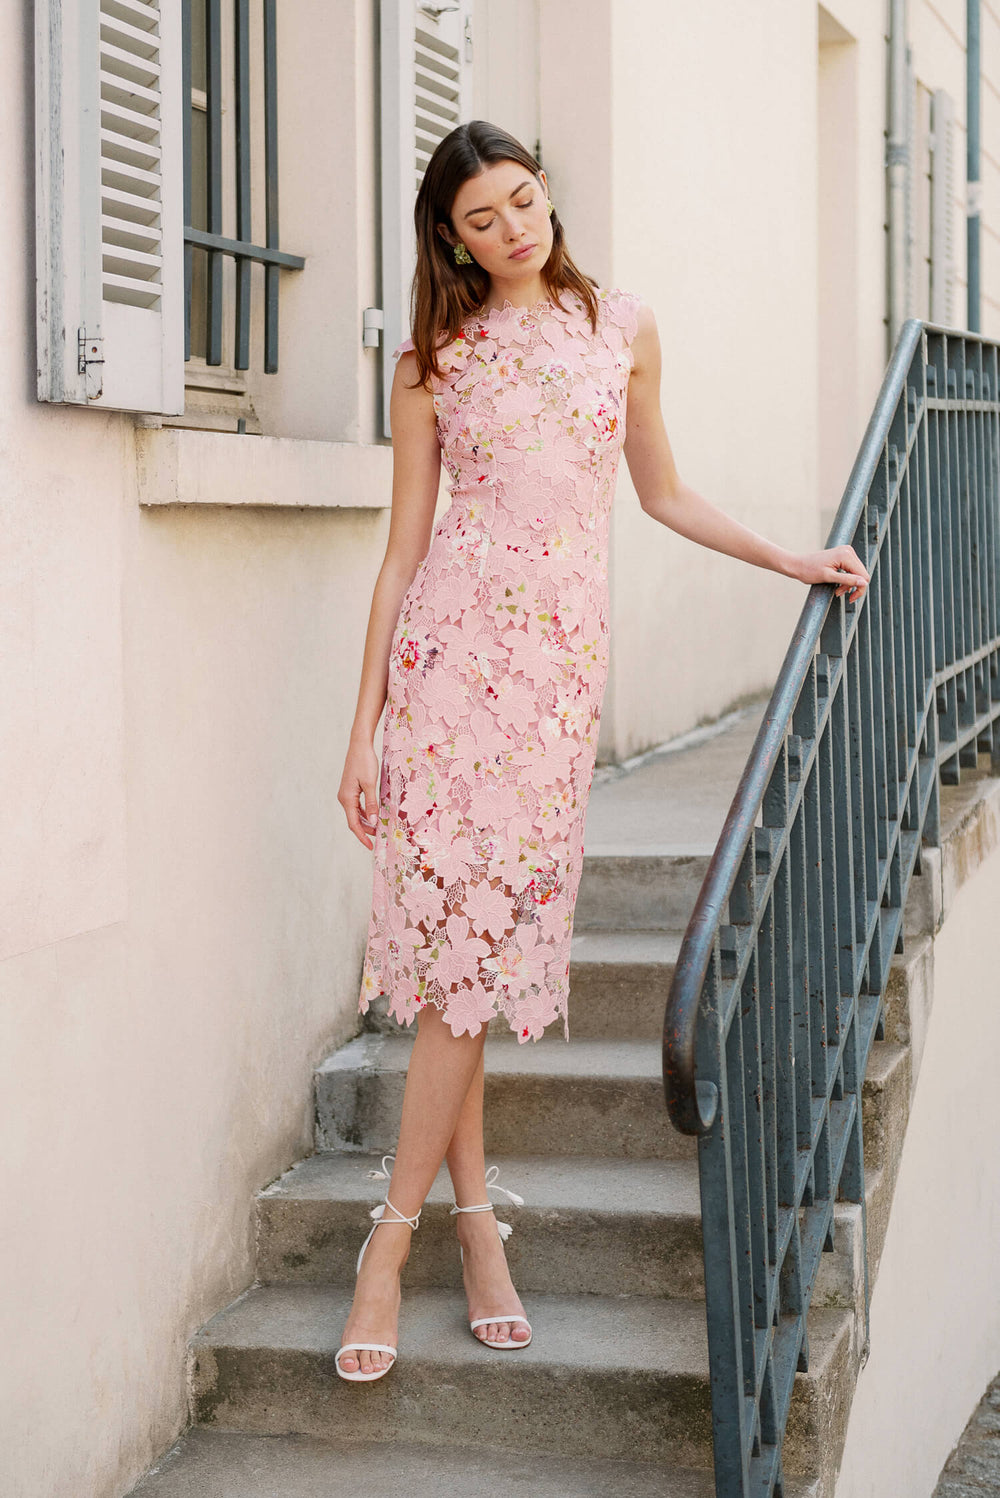 Monique Lhuillier Spring 2024 sleeveless, midi length dress in peony pink floral printed lace.